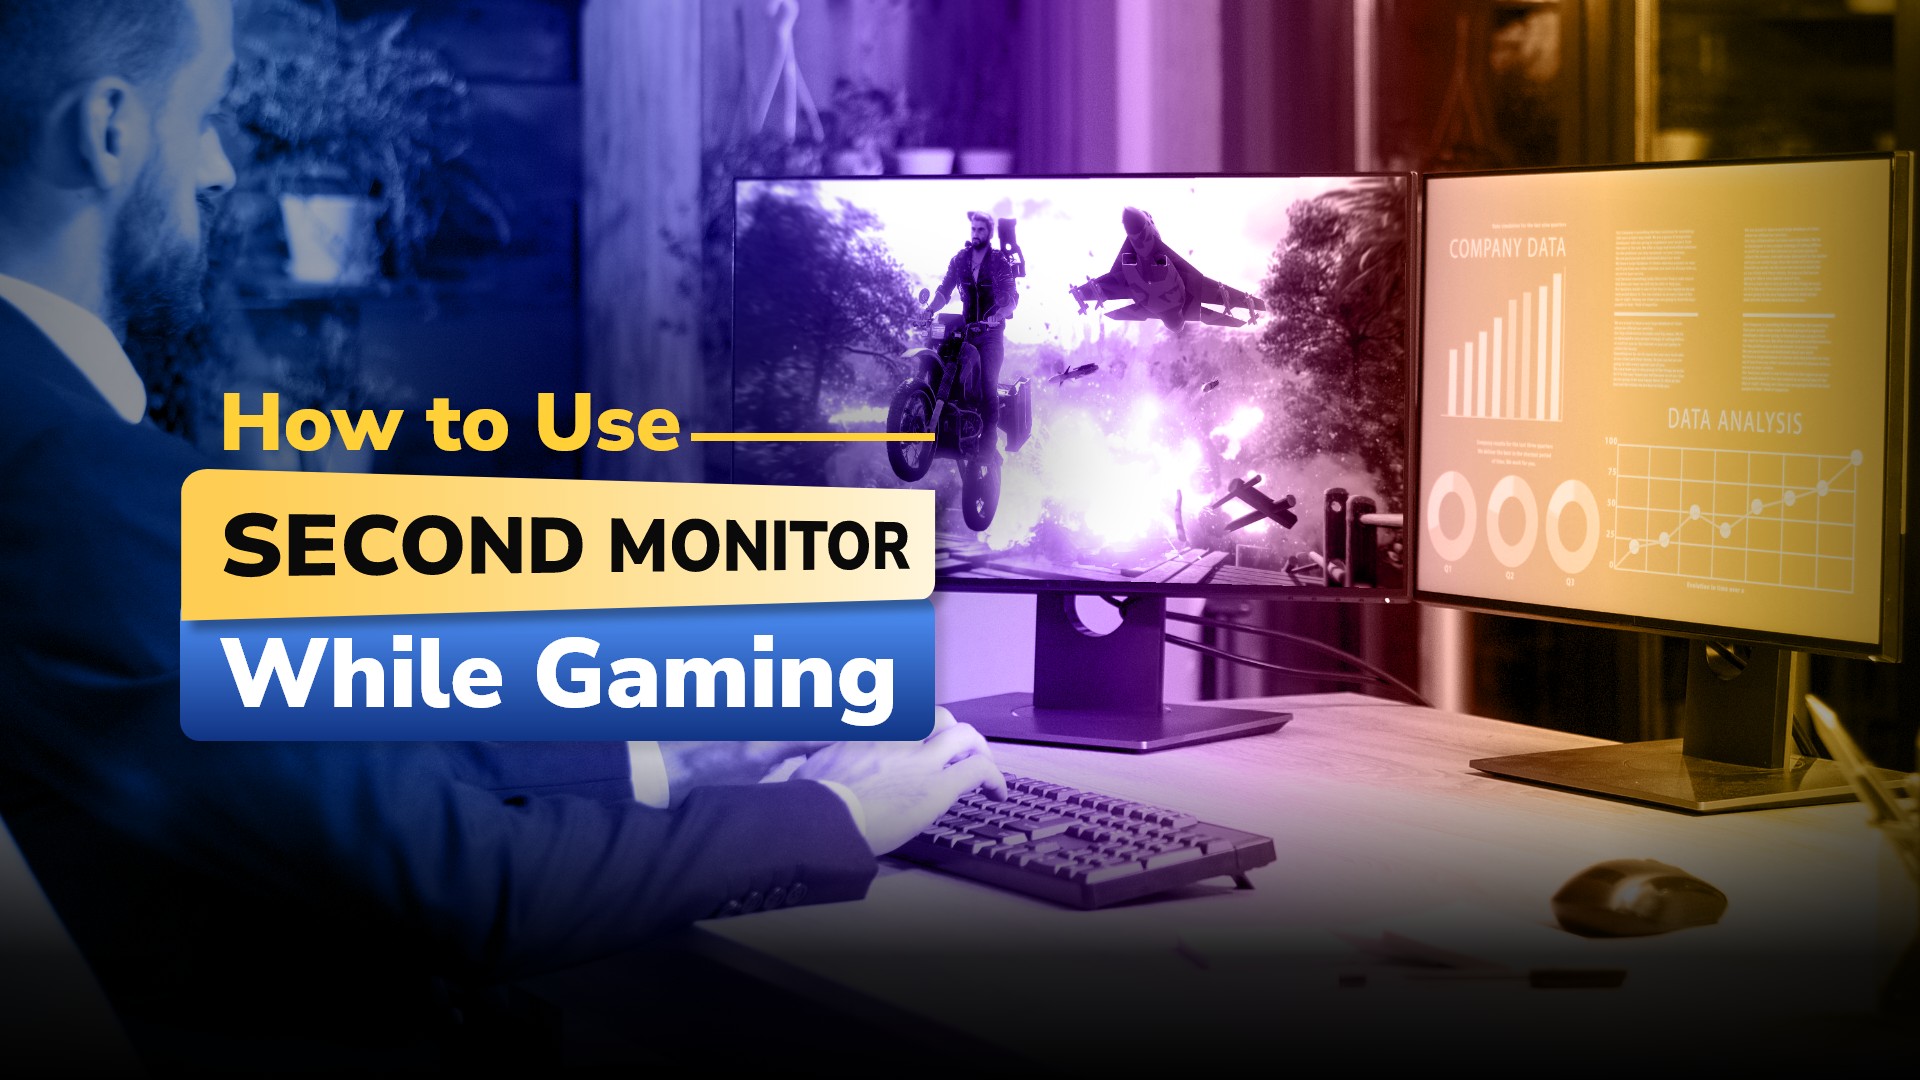 How to Use Second Monitor while Gaming